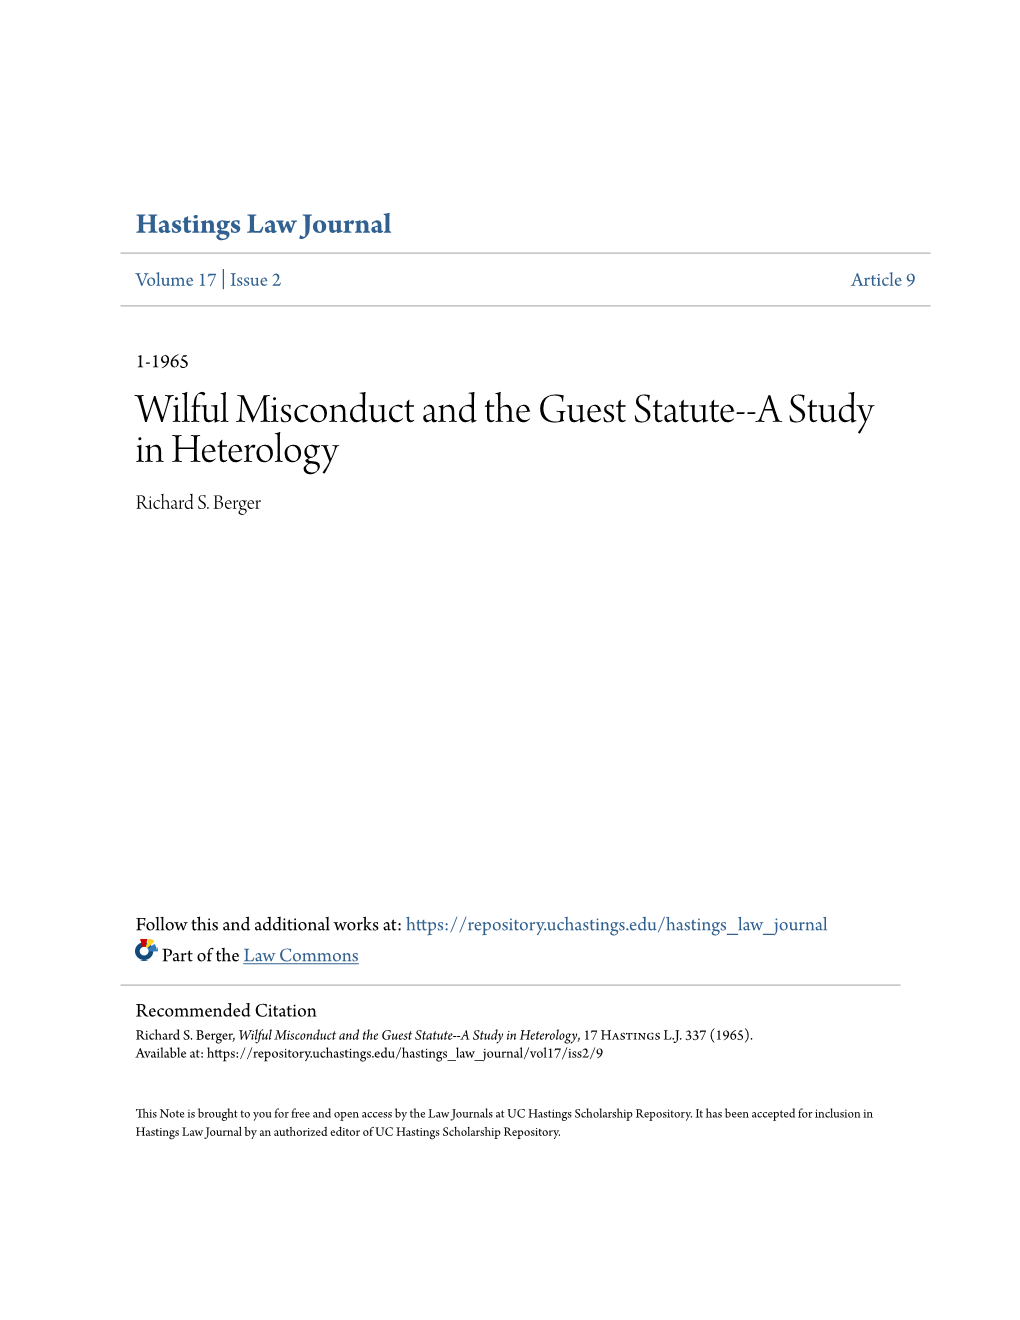 Wilful Misconduct and the Guest Statute--A Study in Heterology Richard S